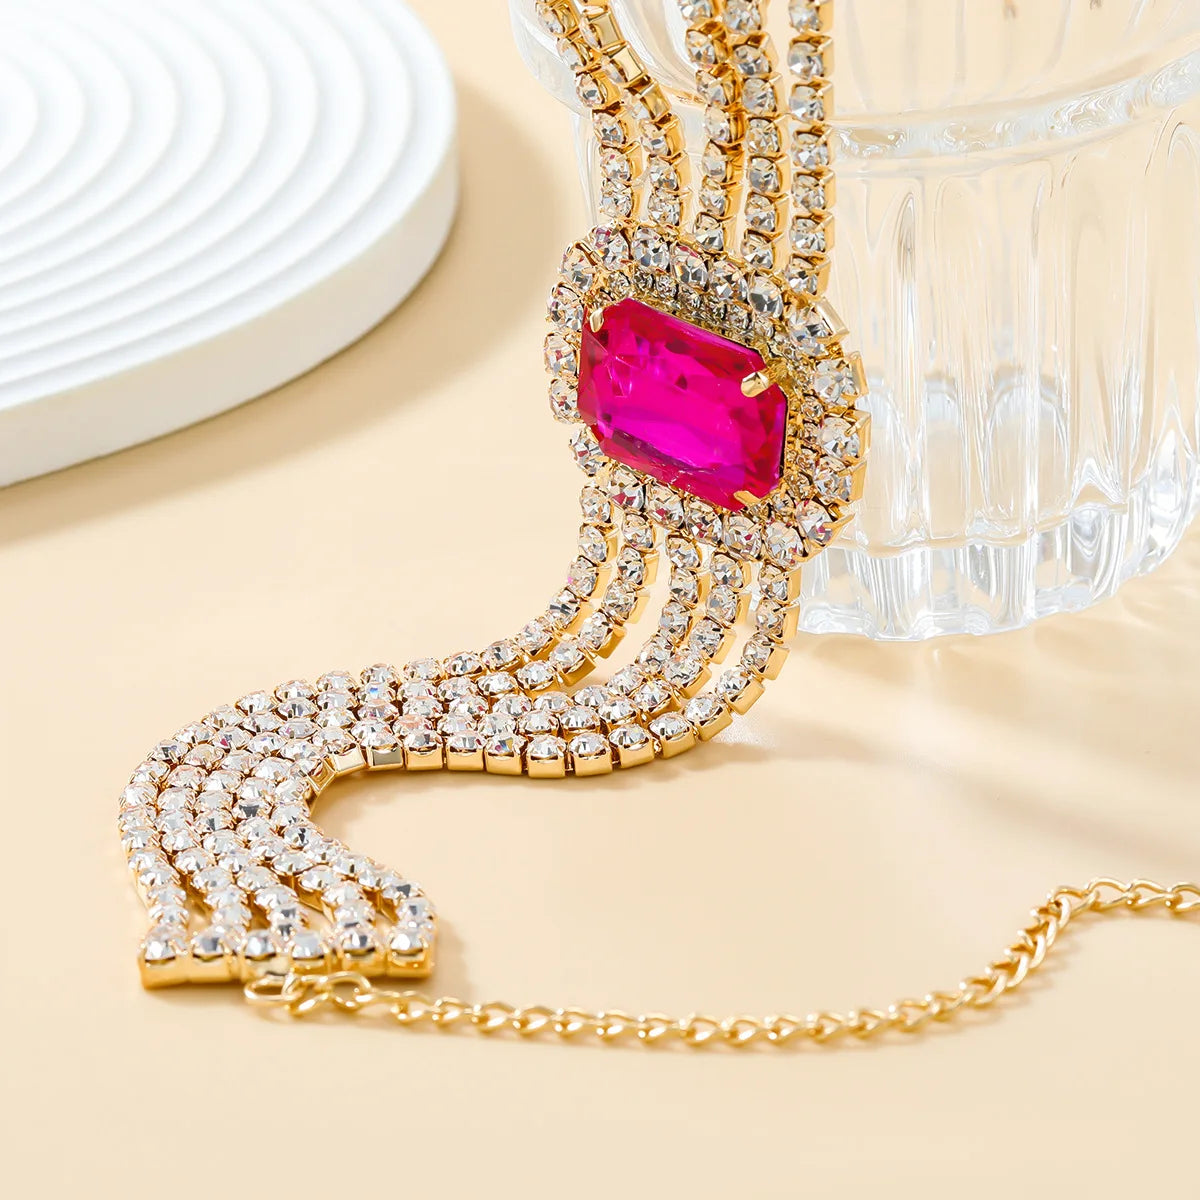 Extravagant Multicolored Rhinestone Square Pendant Necklace for Women with Crystal Hollow Chain